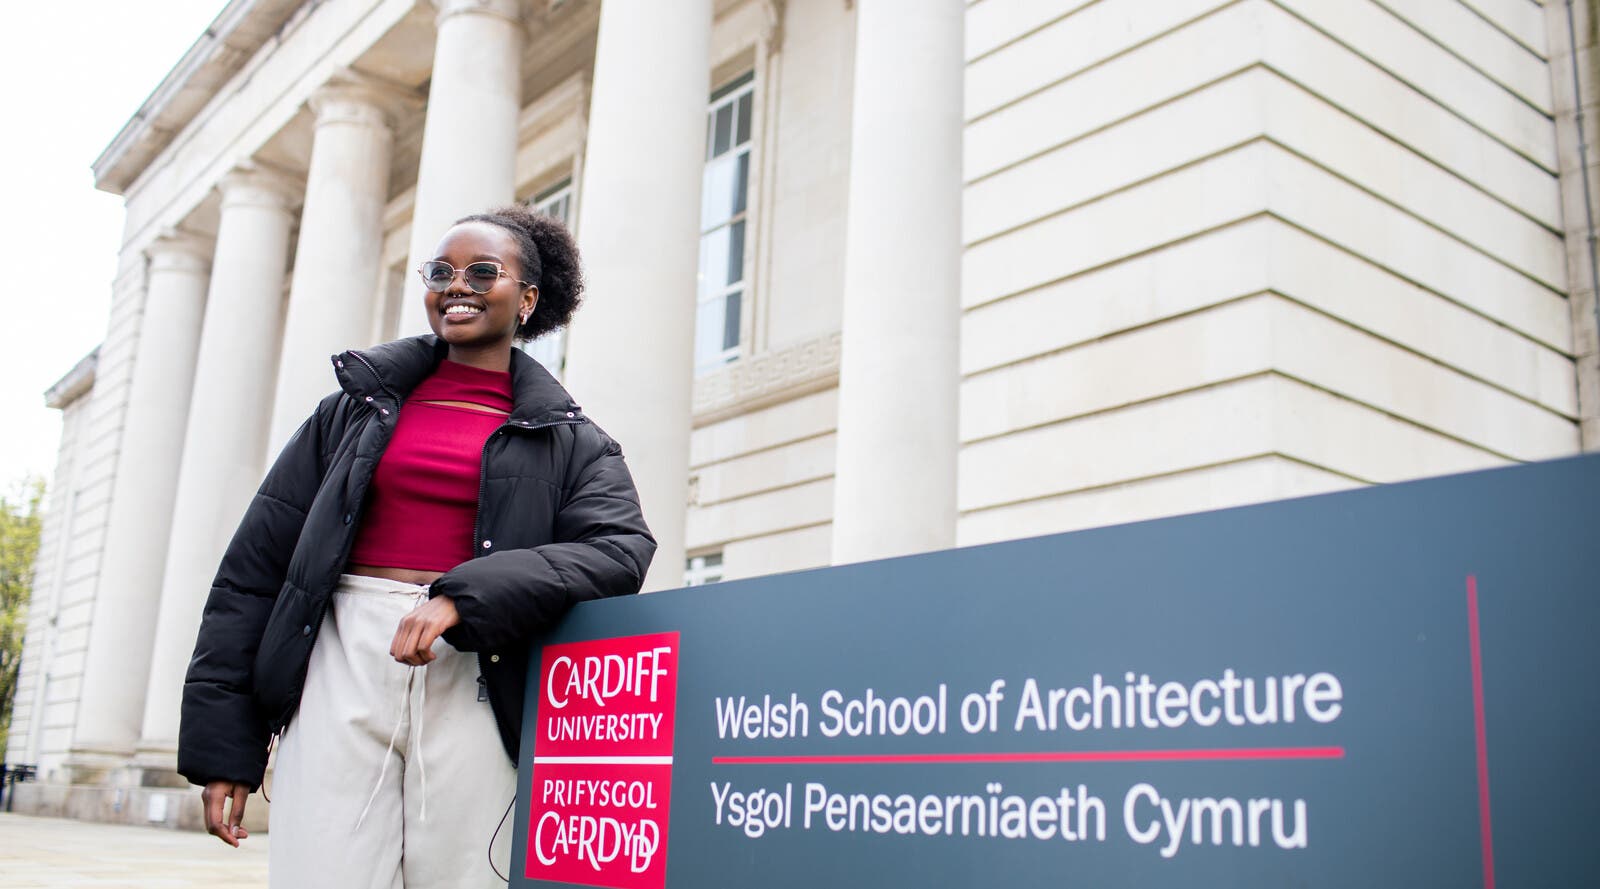 Student smiling and leaning on Cardiff architecture sign